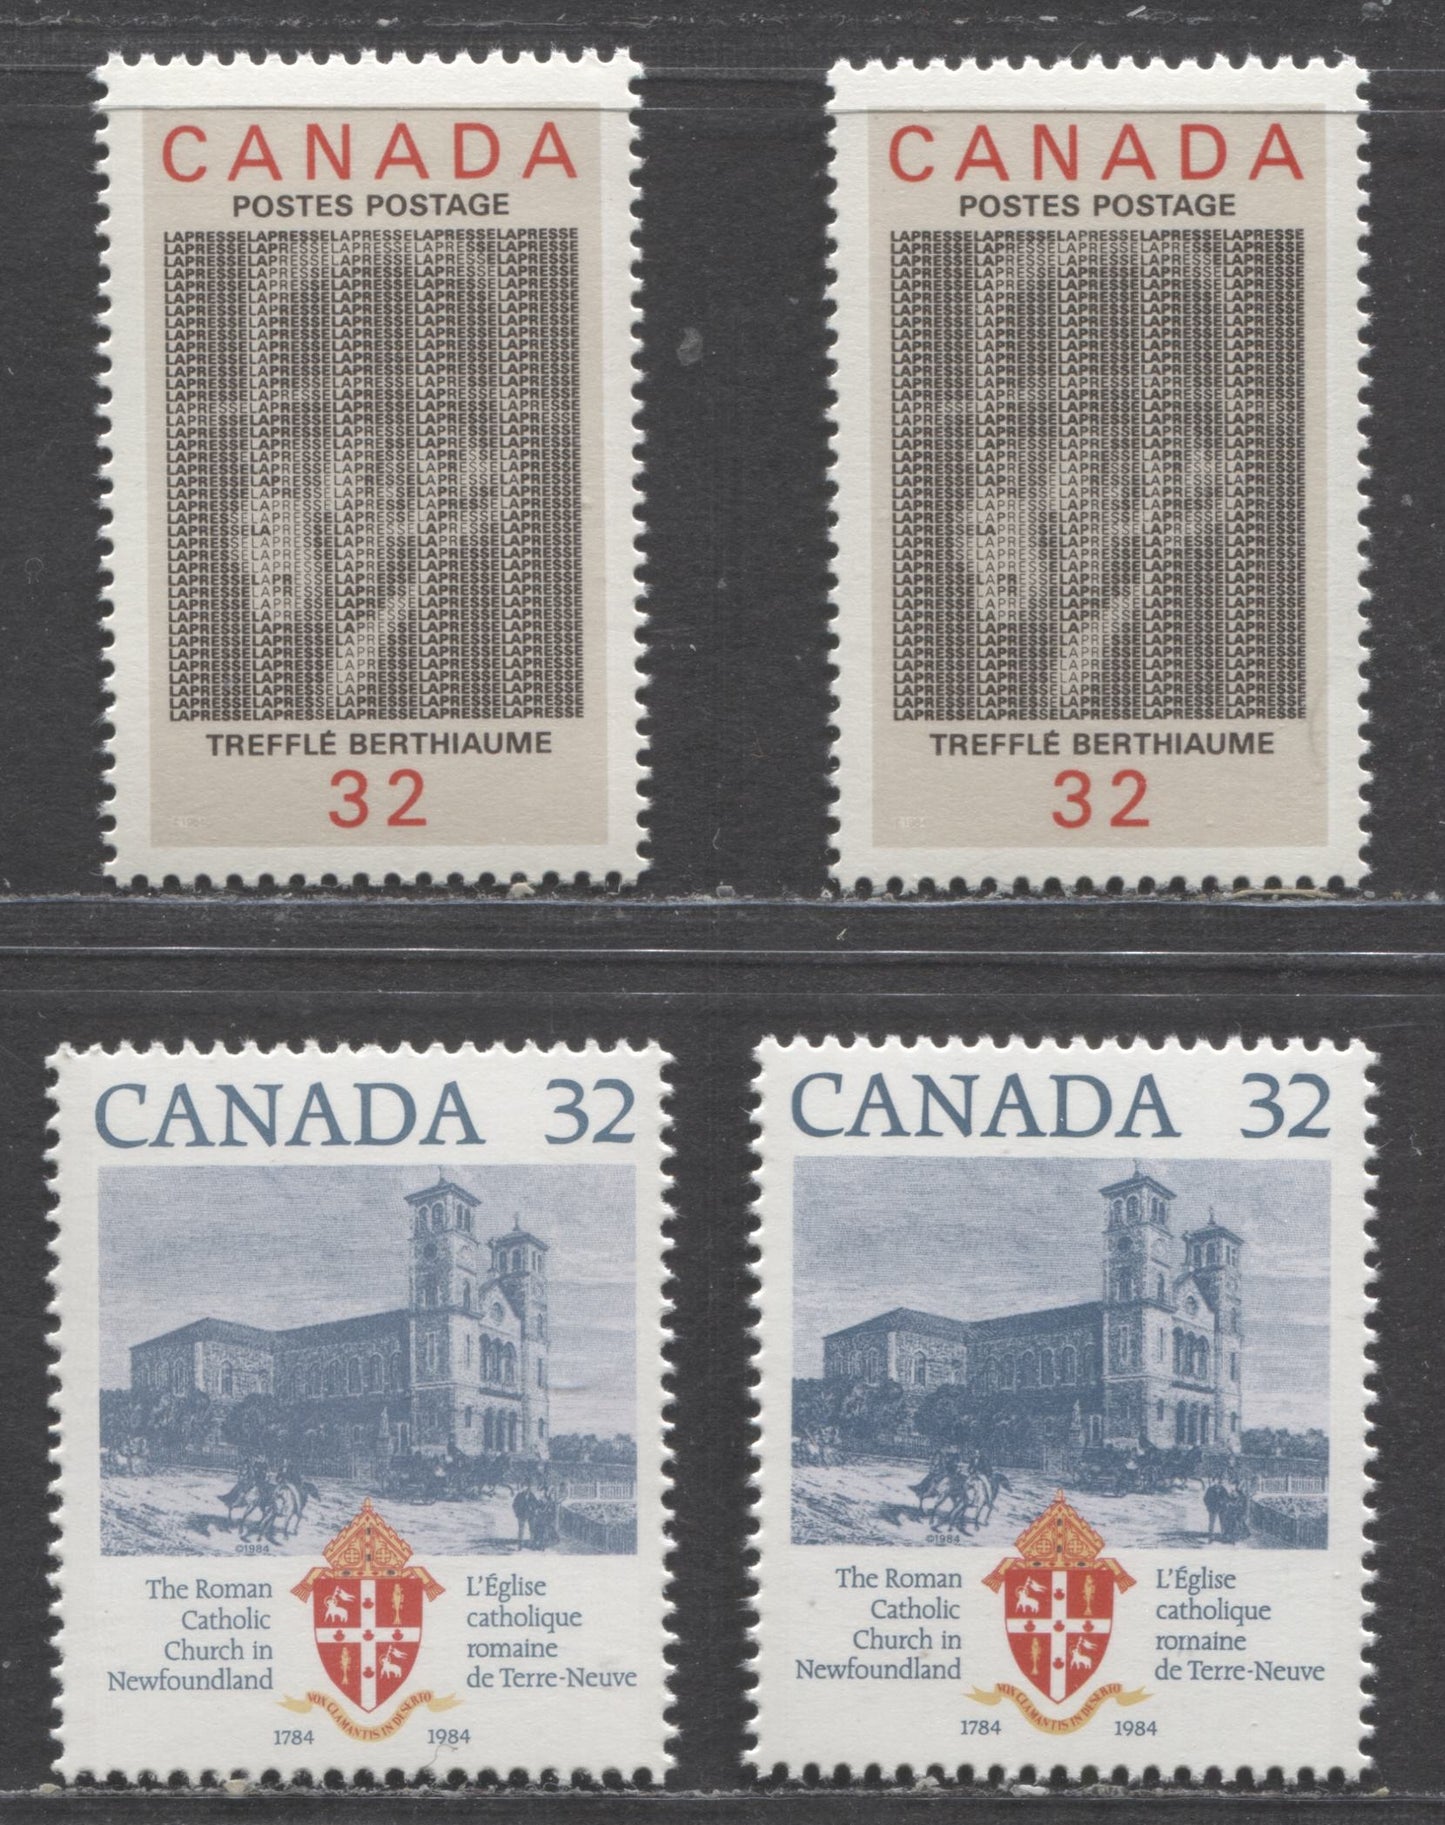 Canada #1029, 1044 32c Multicoloured Basilica Of St.John's, Treffle Berthiaume, 1984 Roman Catholic Church & Treffle Berthiaume Issues, 4 VFNH Singles On Unlisted DF/LF And MF/DF Harrison Papers In Addition To Normal DF/DF